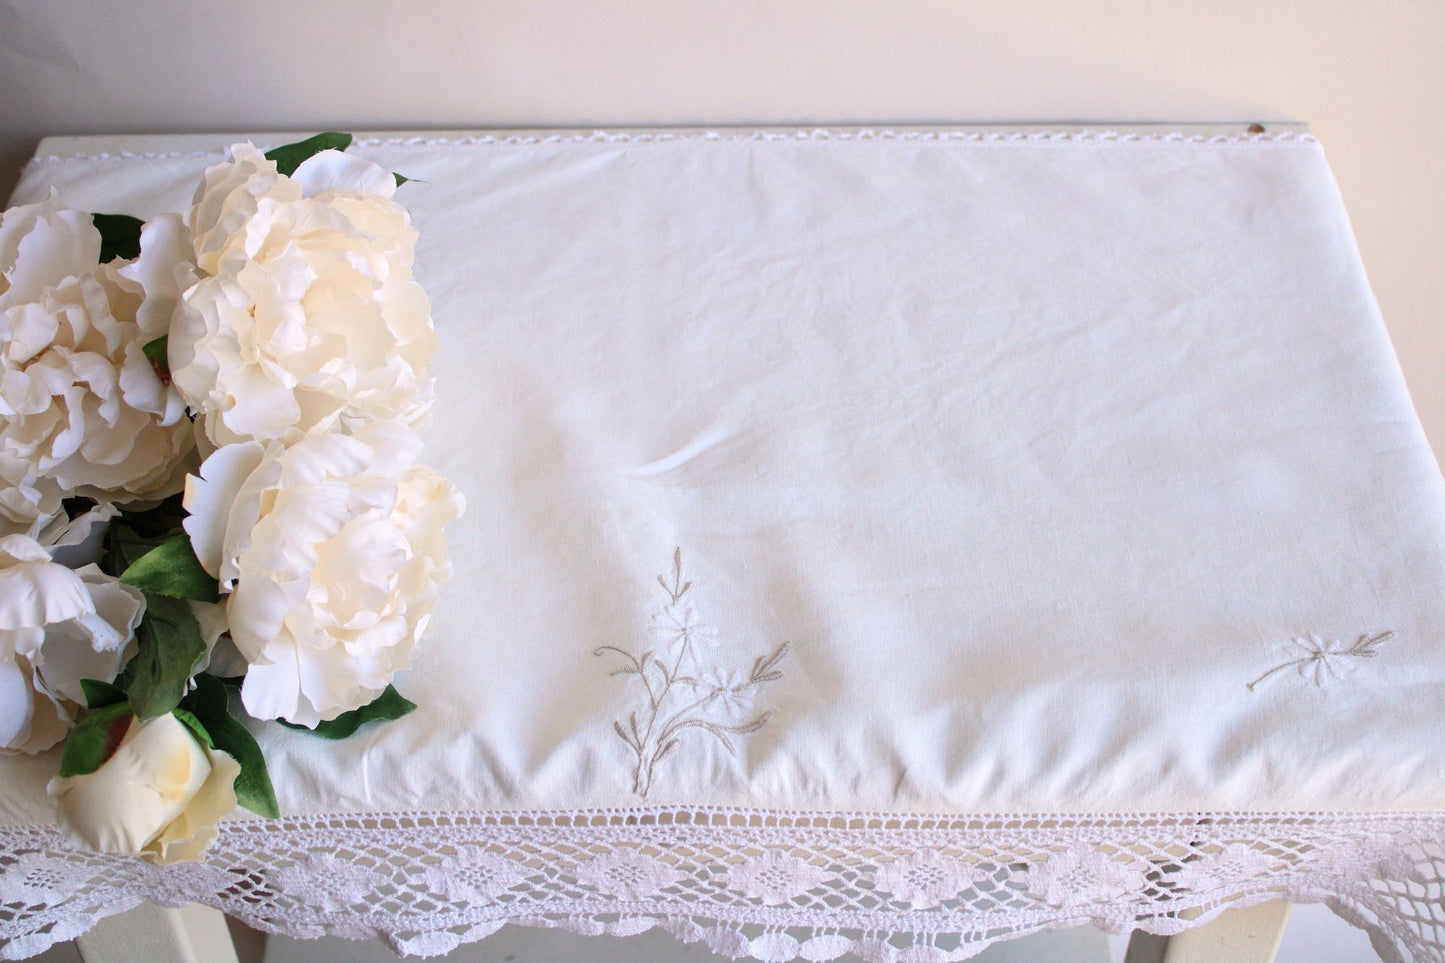 Vintage 1960s Embroidered Table Runner With Daisies